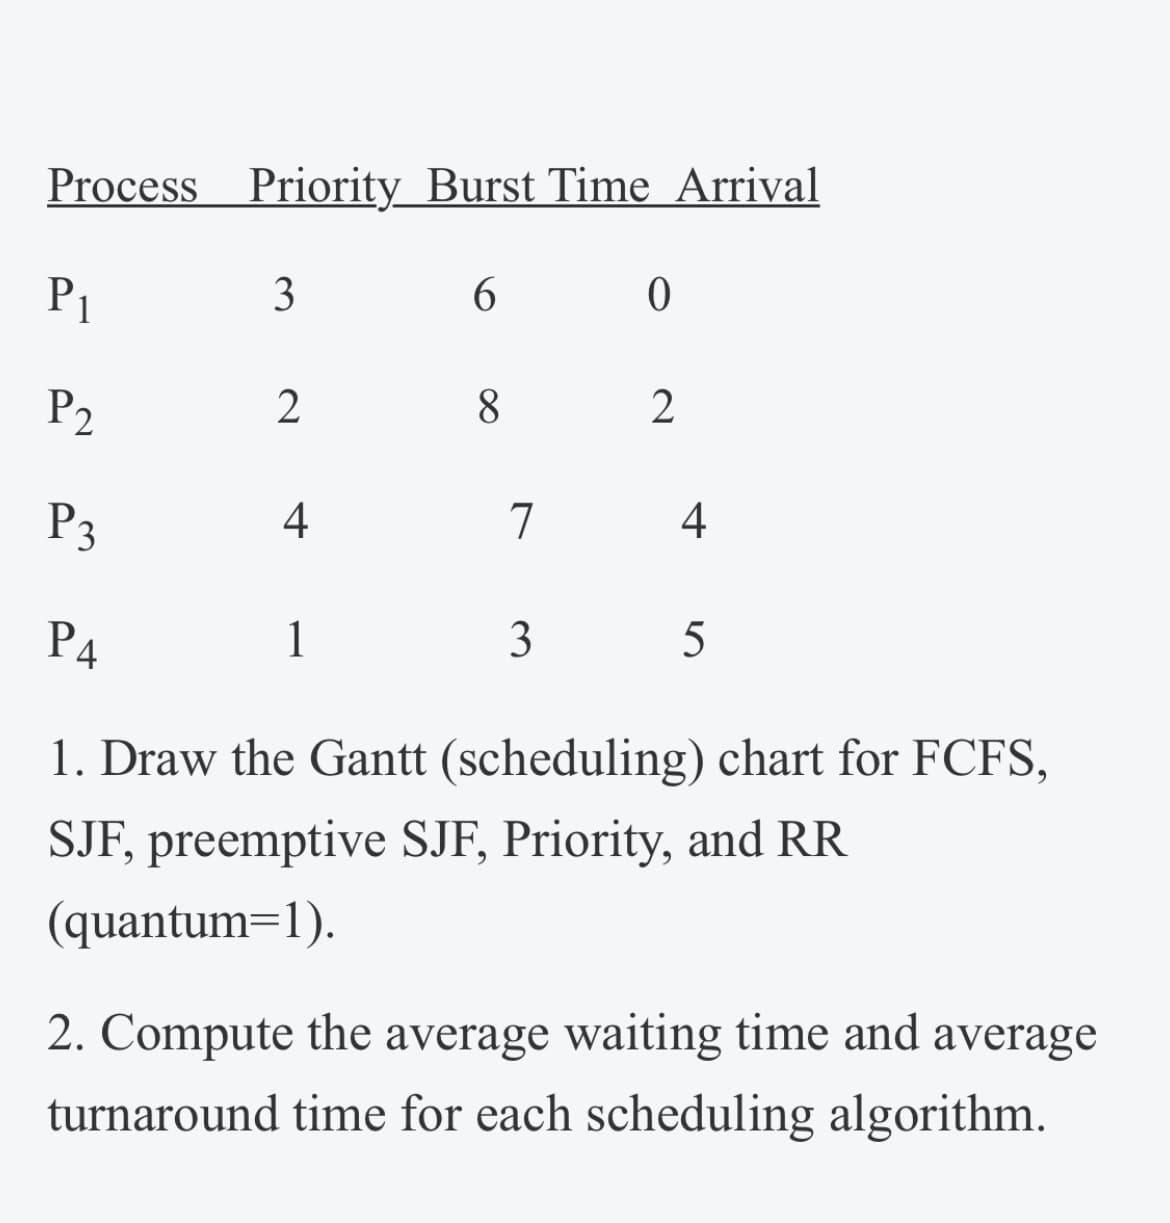 Process Priority_Burst Time Arrival
P1
3
6.
P2
2
8.
P3
4
7
4
PA
1
3
5
1. Draw the Gantt (scheduling) chart for FCFS,
SJF, preemptive SJF, Priority, and RR
(quantum=1).
2. Compute the average waiting time and average
turnaround time for each scheduling algorithm.
